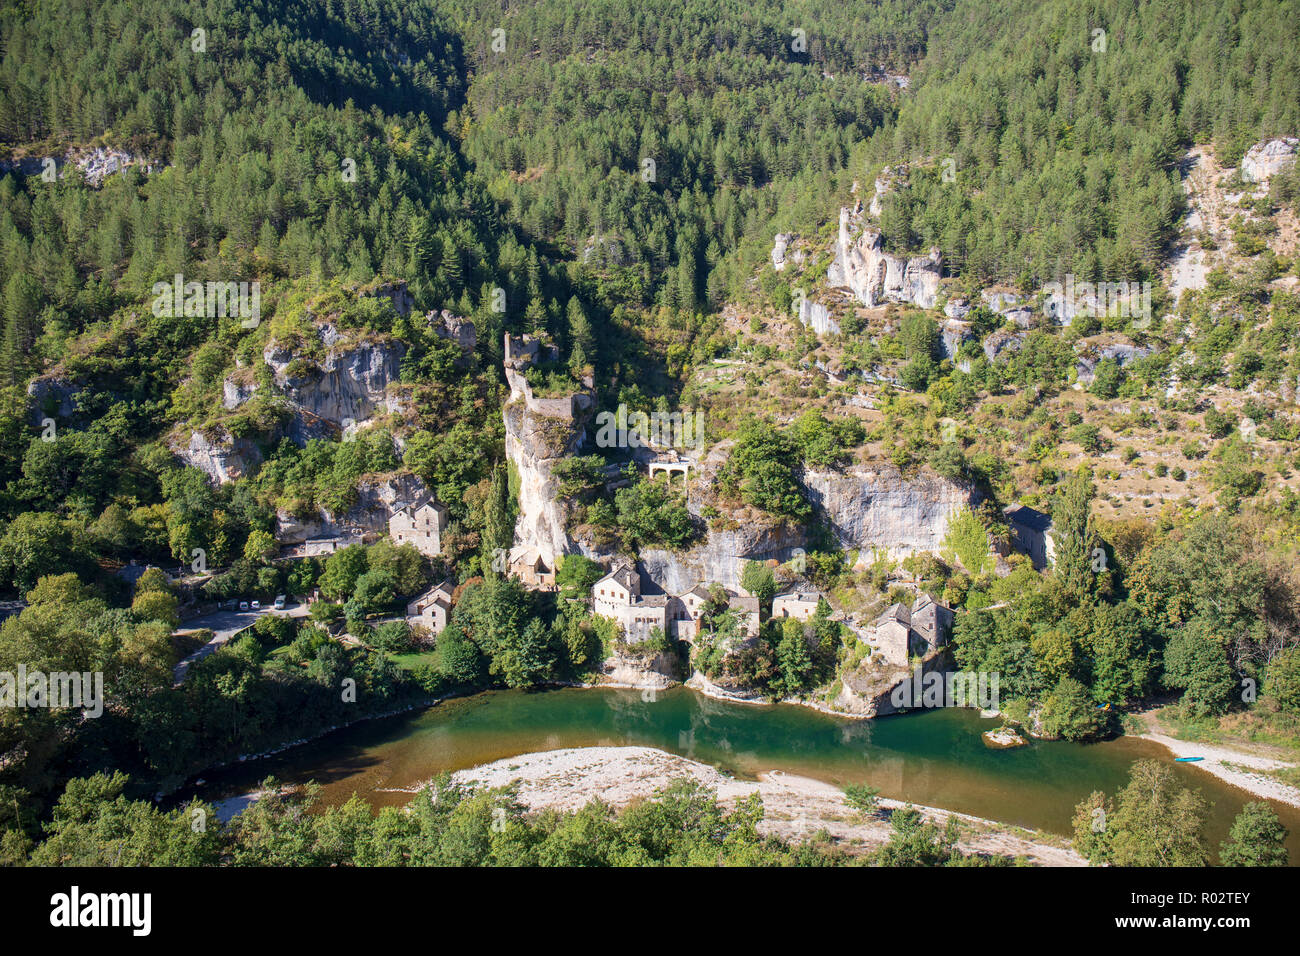 The medieval village of Castelbouc perched on the cliff side of the Gorge du Tarn, France Stock Photo